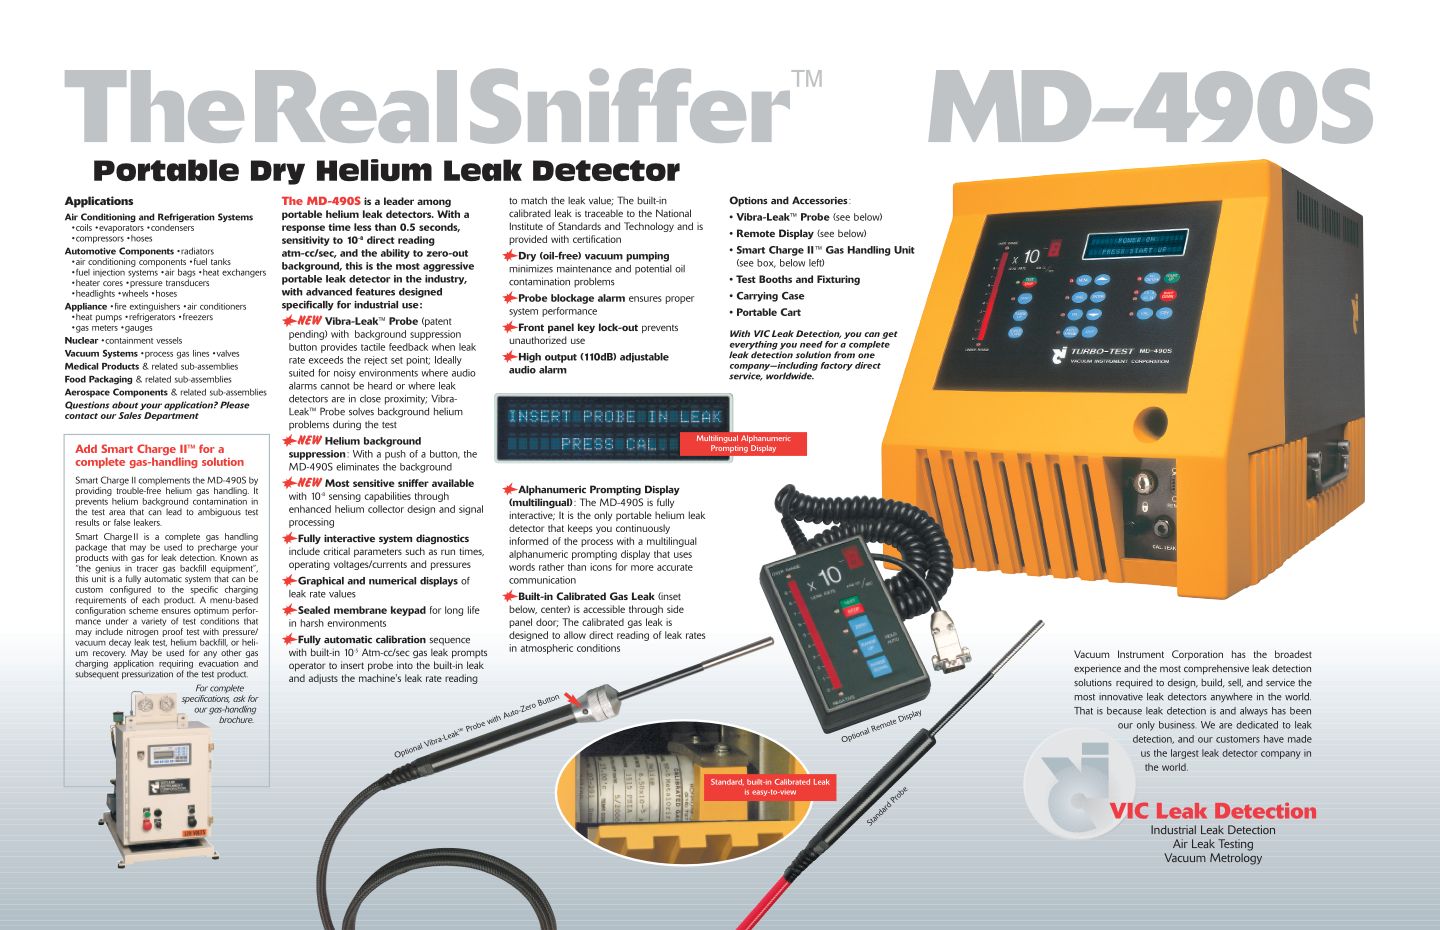 This image represents a 2-page spread inside a printed technical sales brochure for the portable helium leak detector featured in the ad above. Here, the “Real Sniffer” is revealed to be the manufacturer’s model MD-490S, the newest addition to our client’s line of industrial leak detectors.